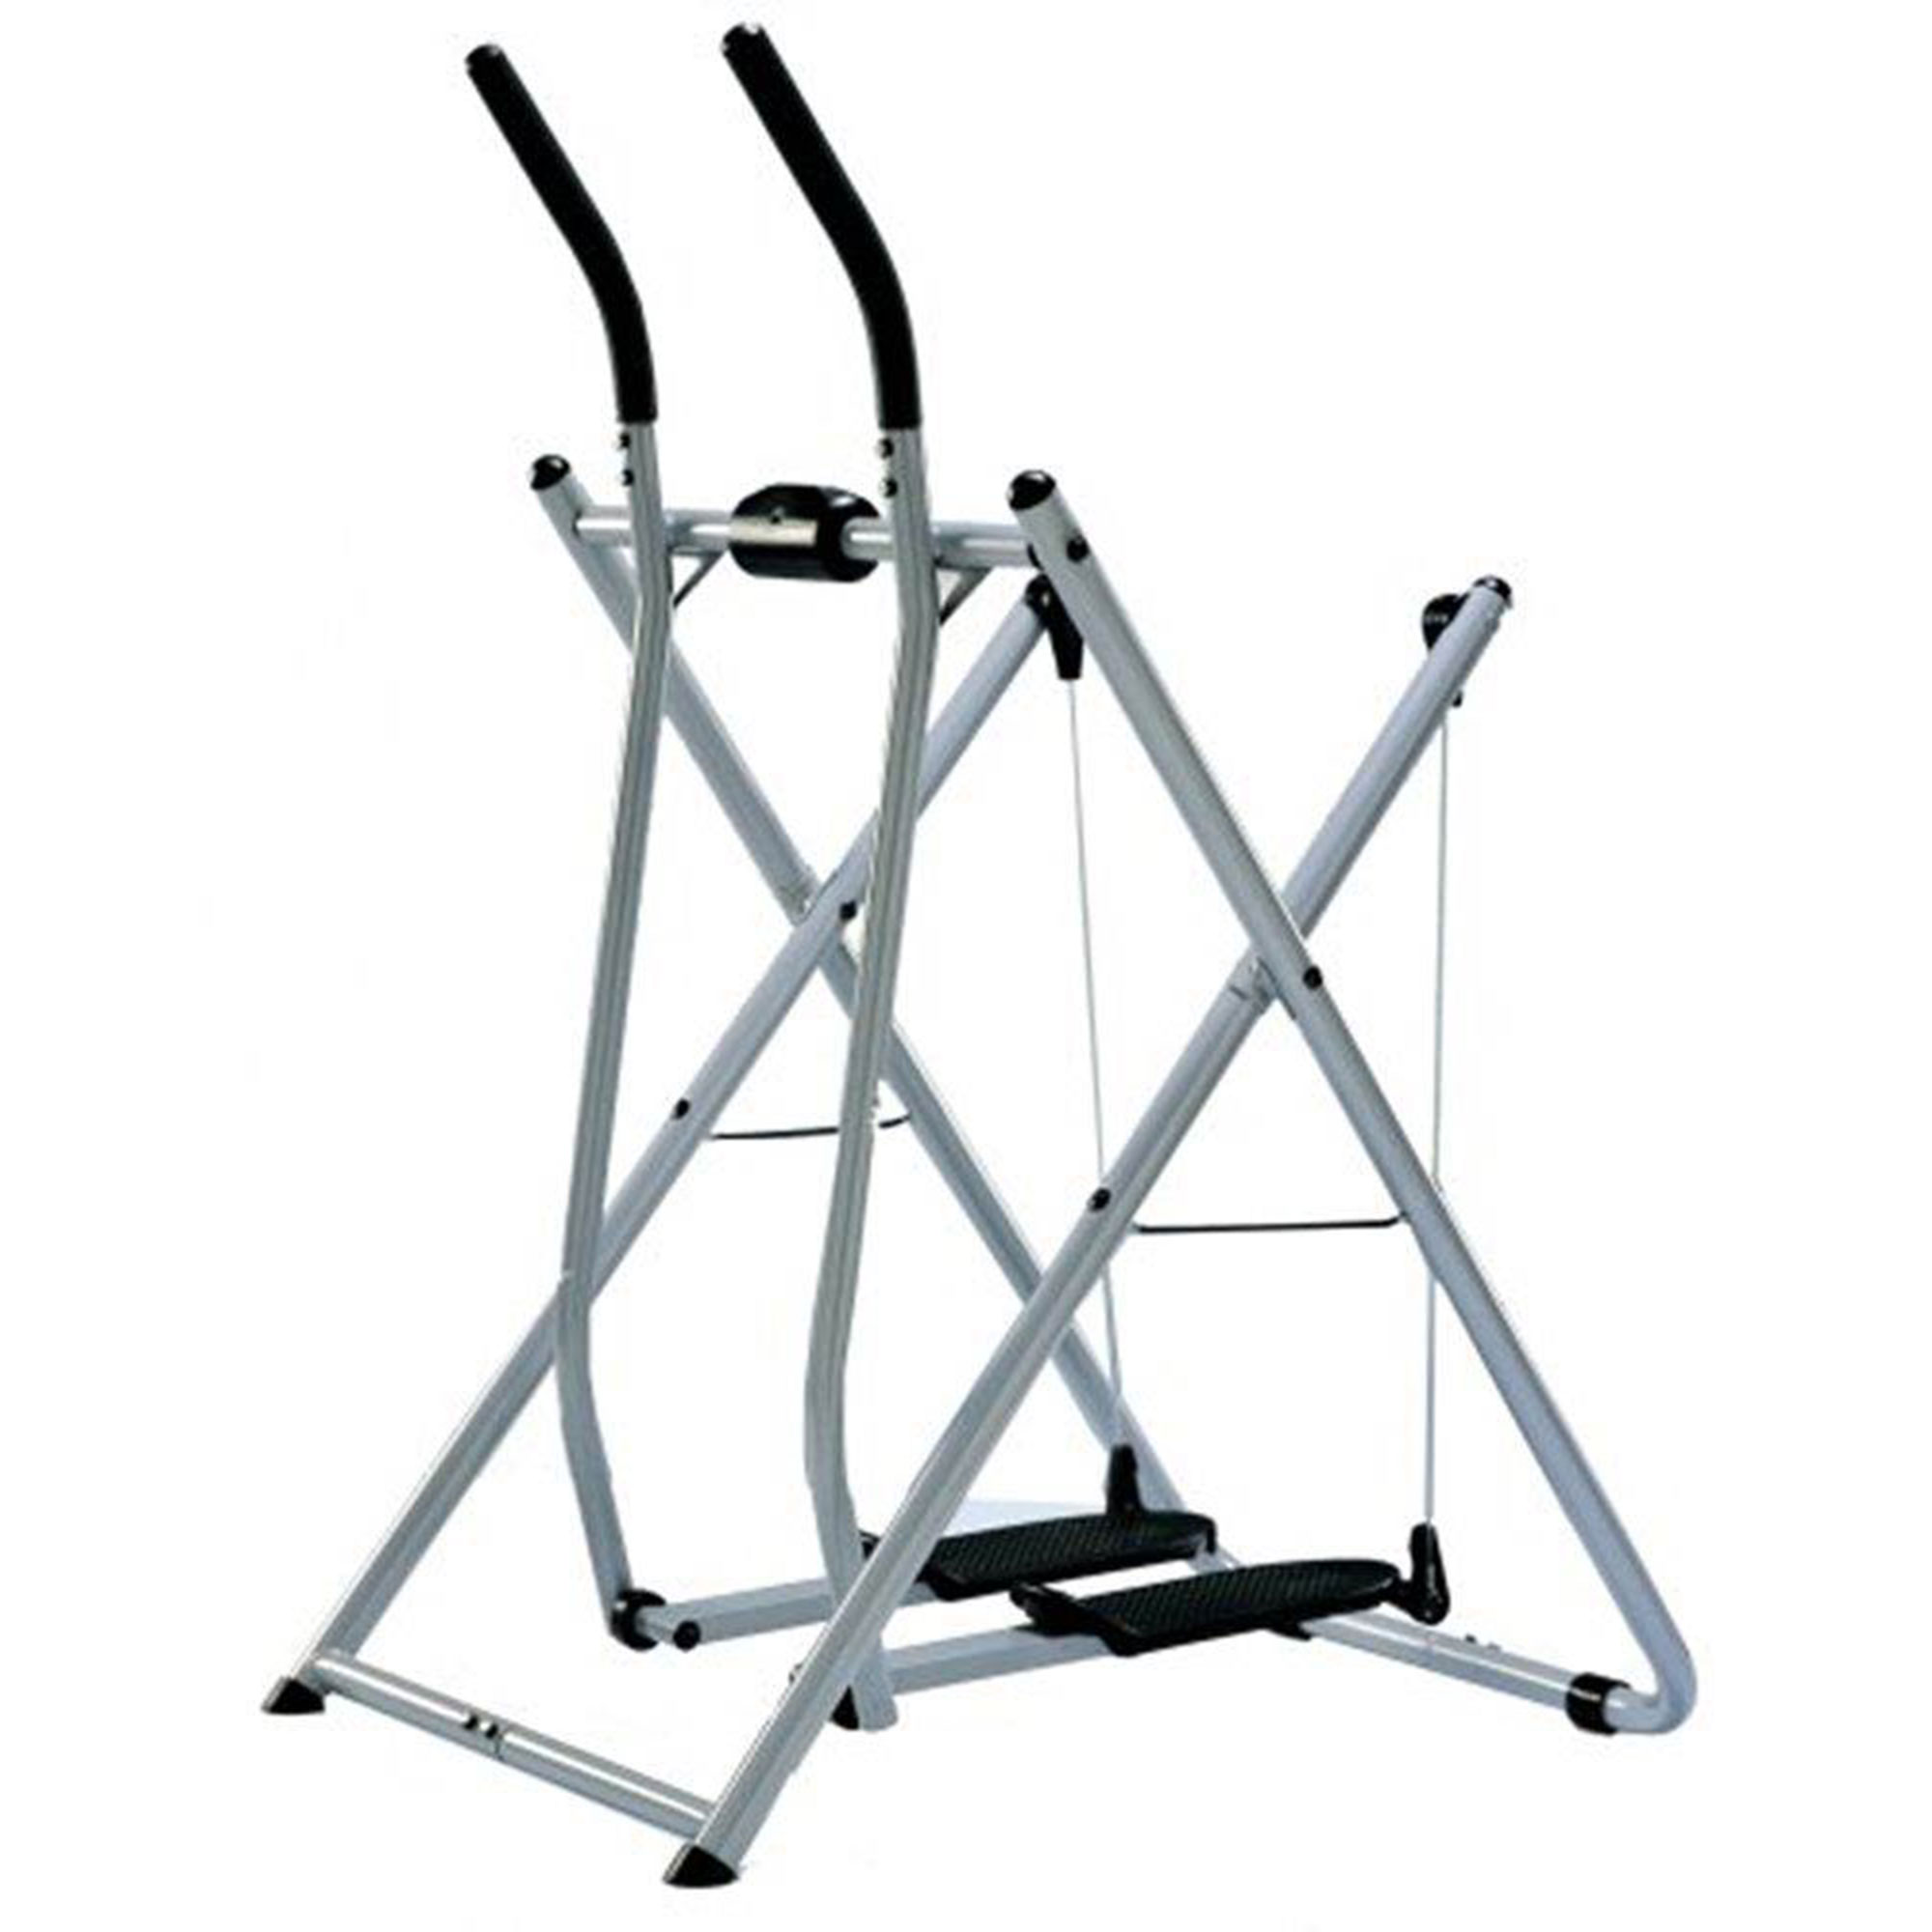 Gazelle Edge Glider Home Fitness Exercise Equipment Machine w/ Workout DVD - image 1 of 12